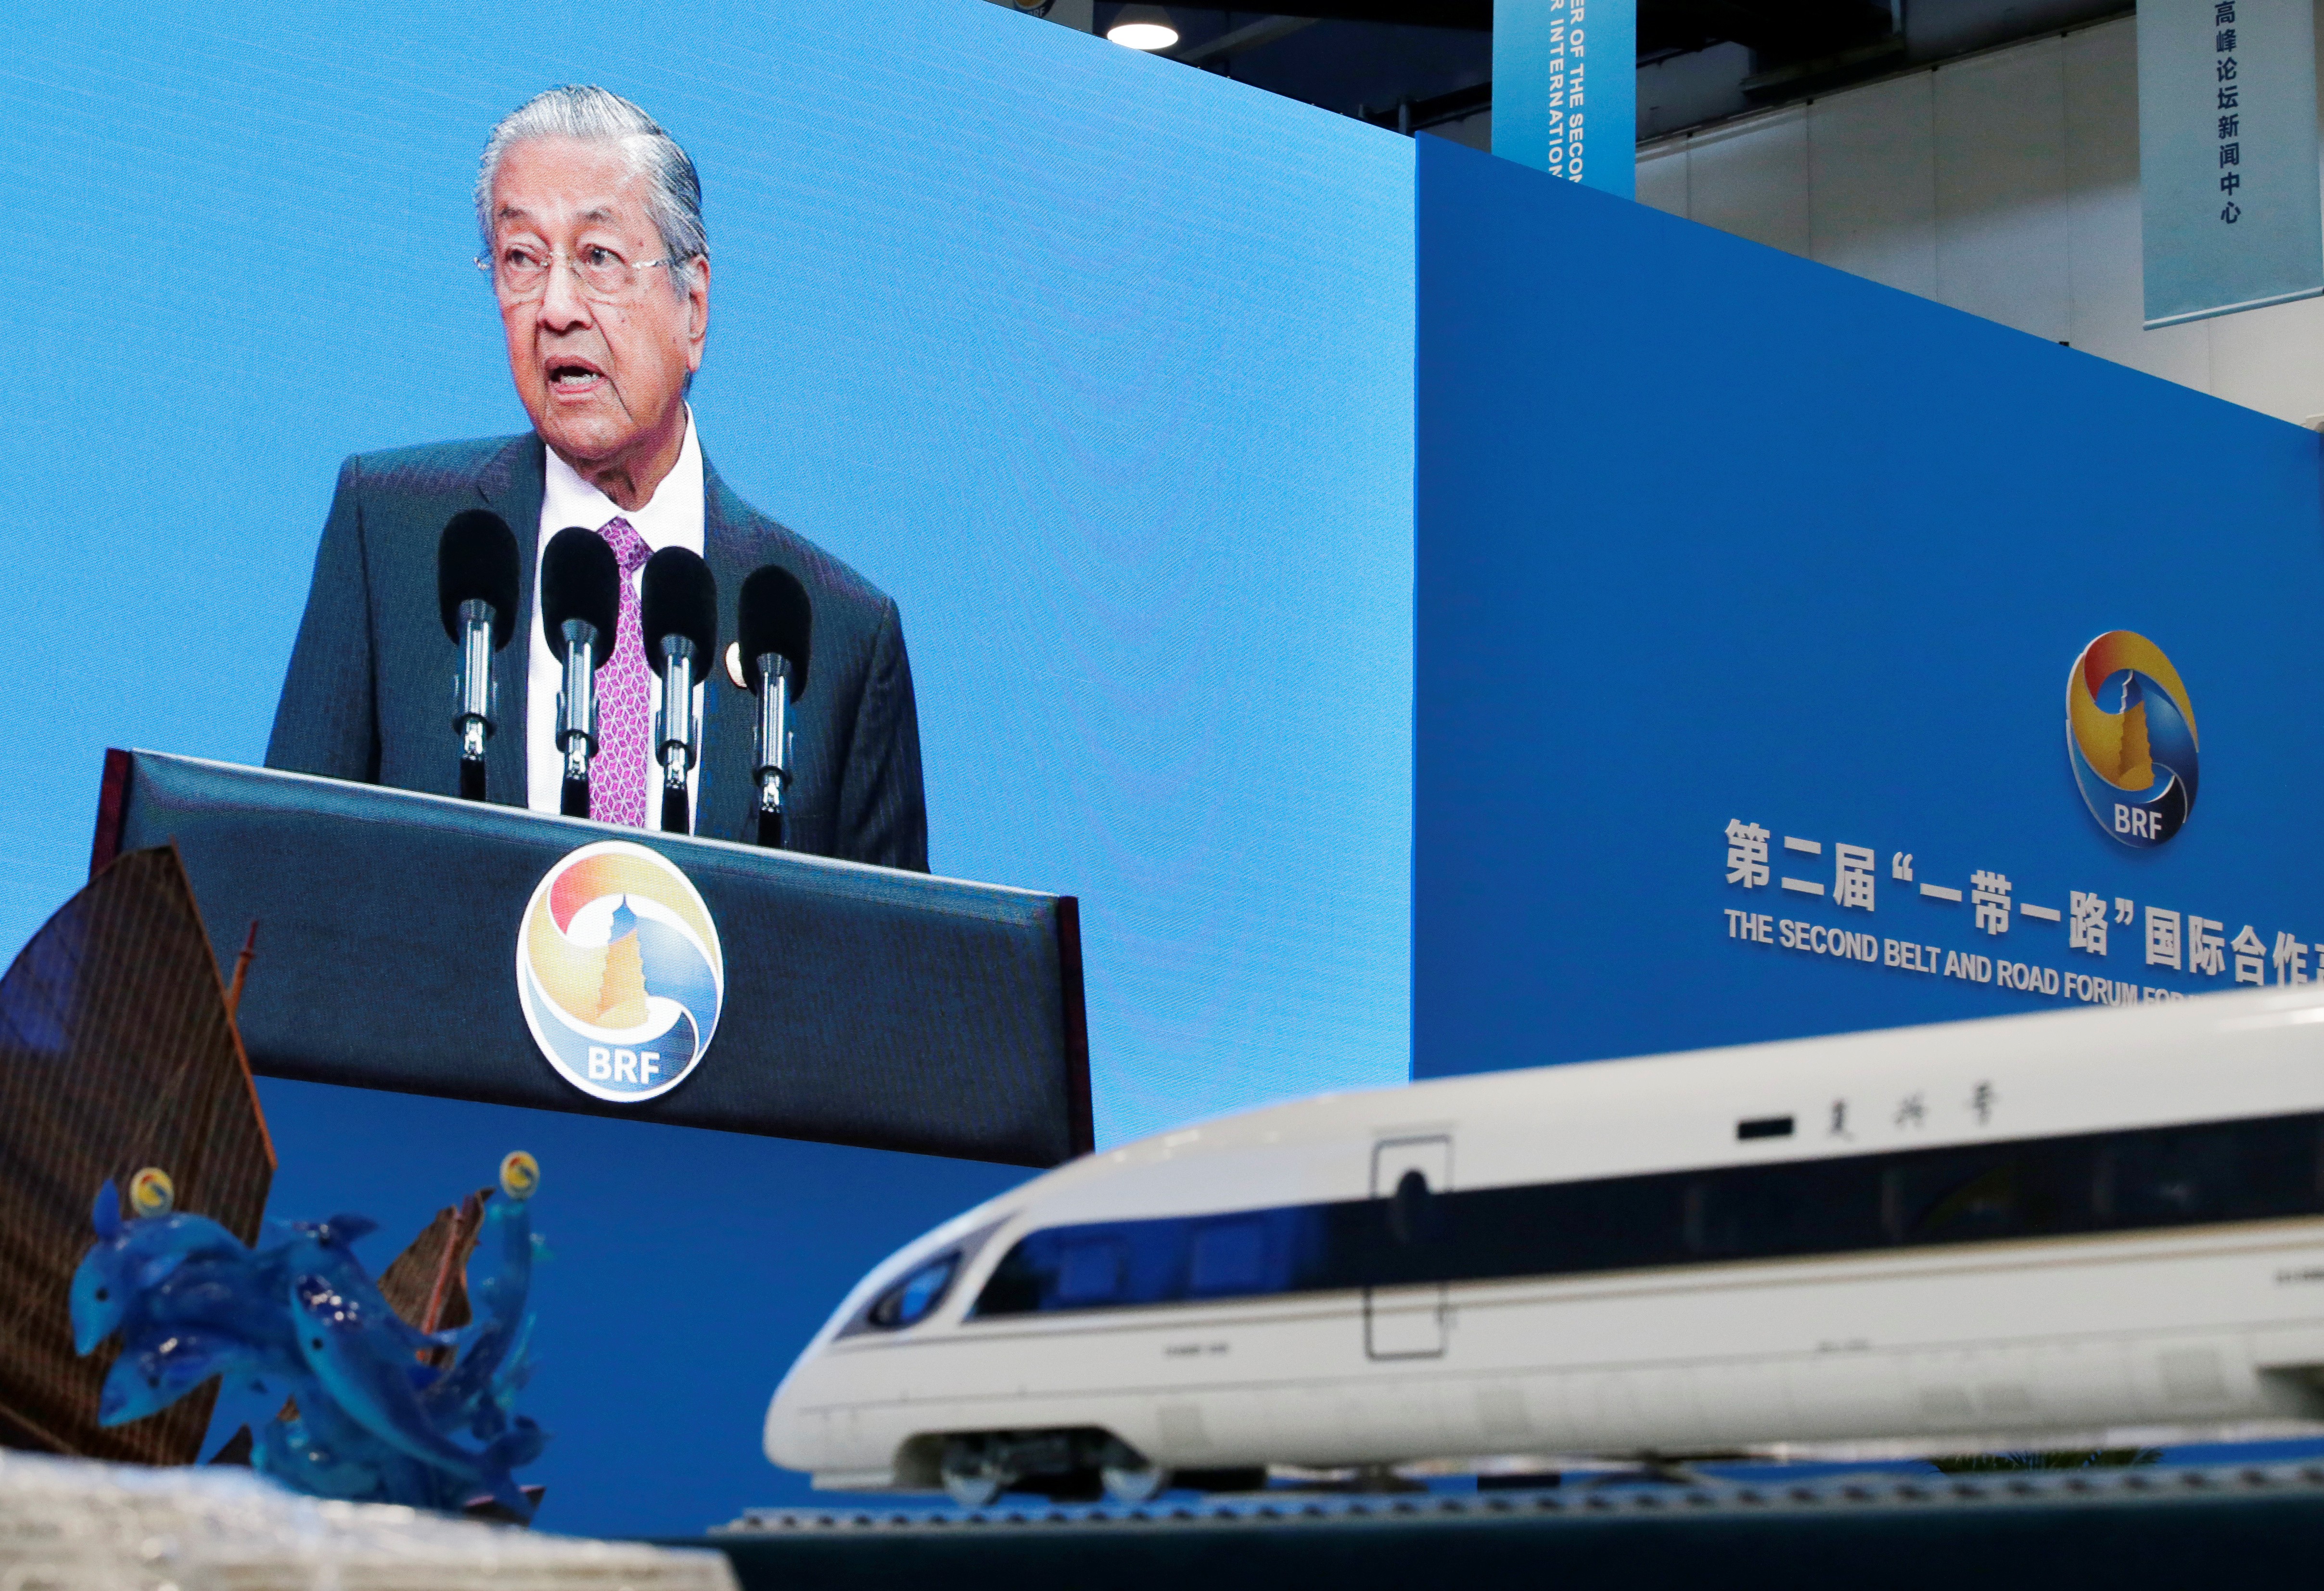 Mahathir Mohamad speaks at the opening ceremony for the second Belt and Road Forum. Despite Malaysia’s political impasse, there are both internal and external reasons for the continuation of the East Coast Rail Link (ECRL). Photo: Reuters